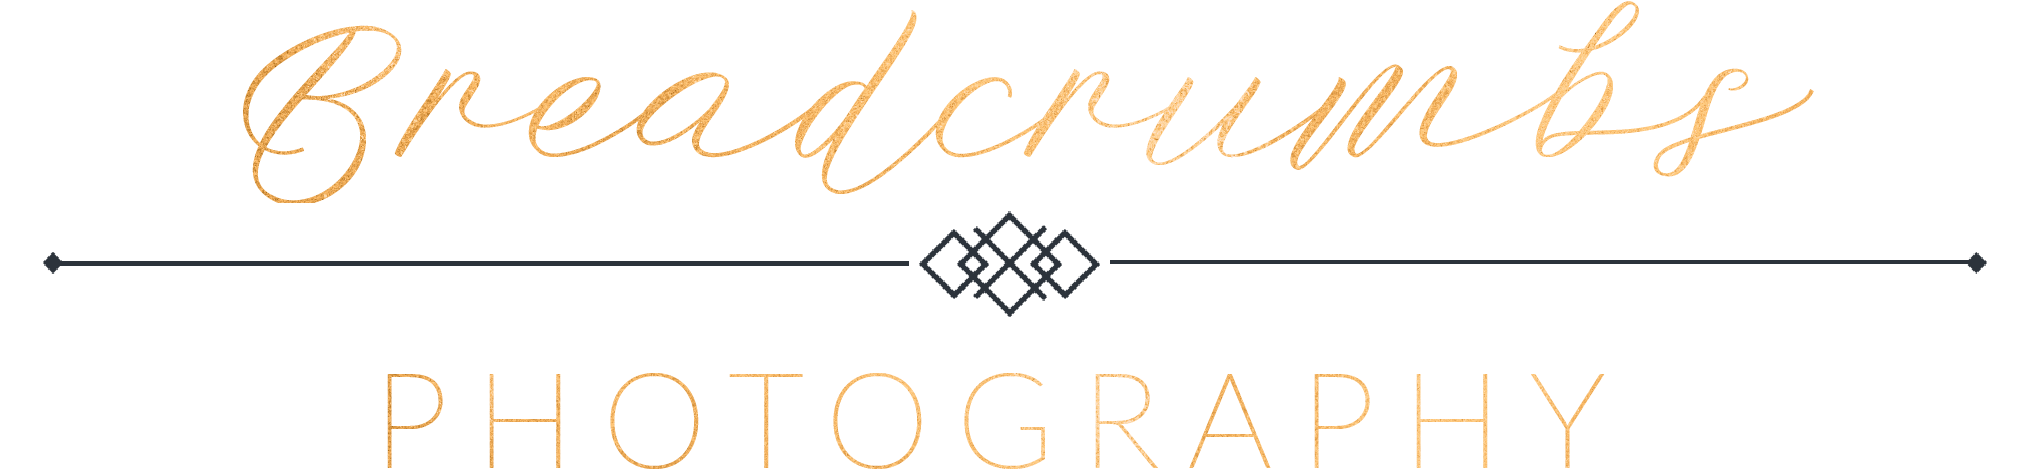 Breadcrumbs Photography Logo PNG